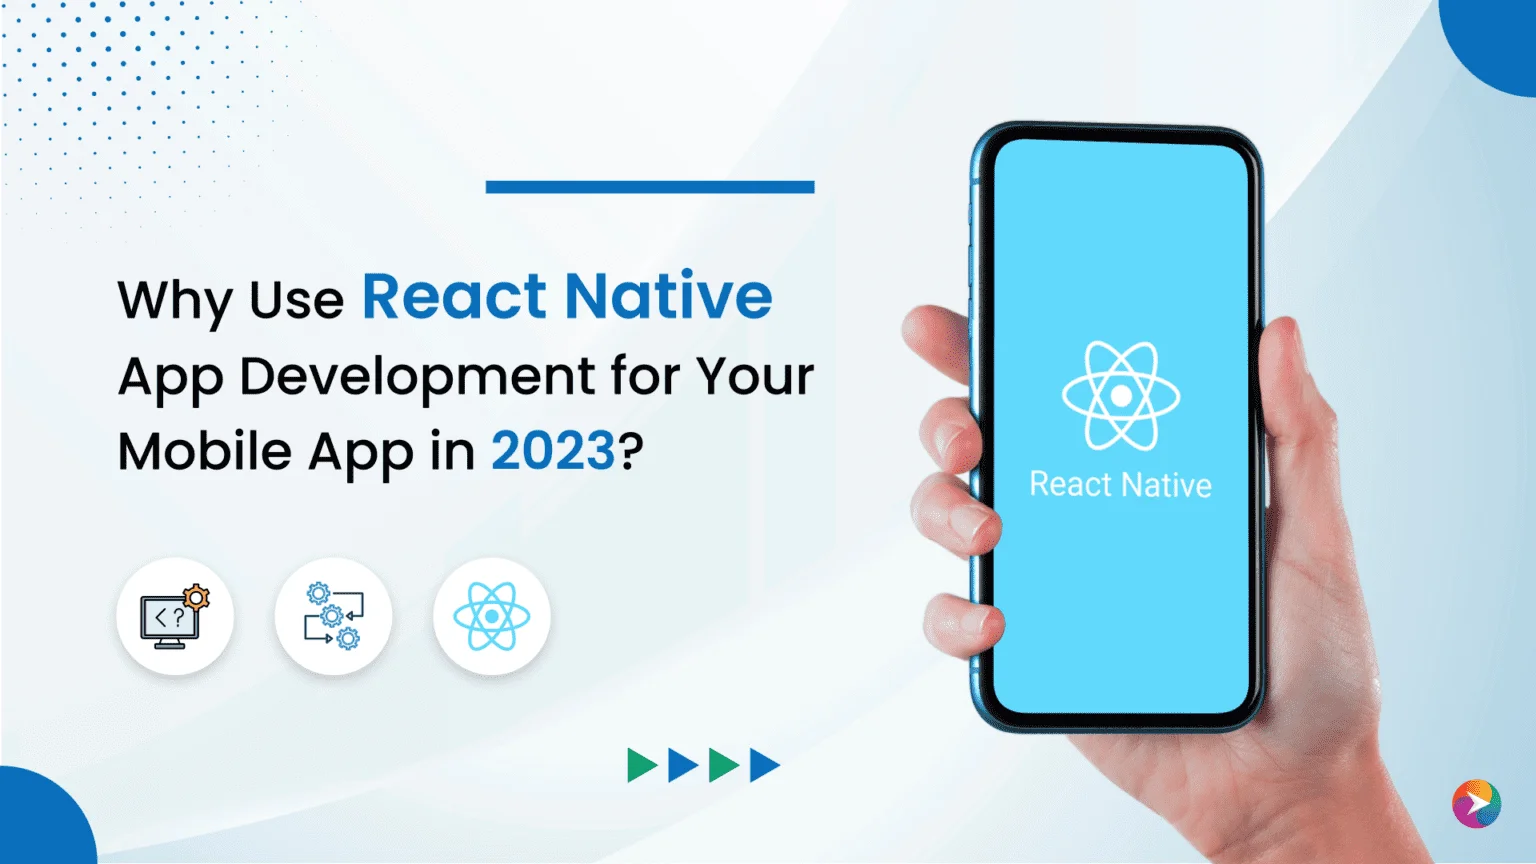 Why Use React Native App Development for Your Mobile App in 2023?